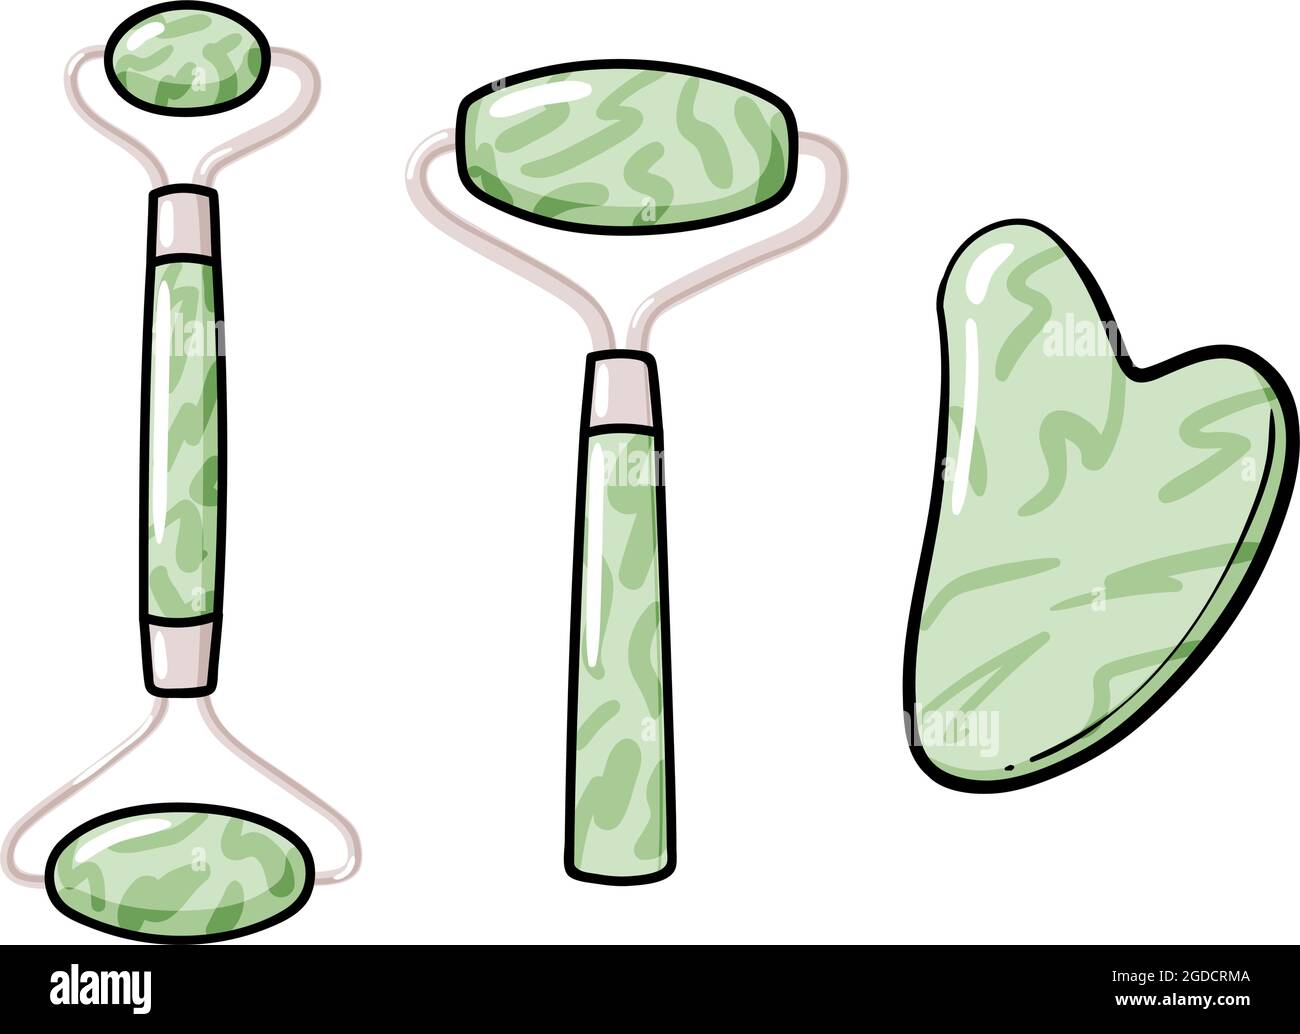 Gua Sha and facial massage roller tool isolated on white background. Green quarts stone self massage scraper. Home beauty routine. Modern flat doodle set of illustrations of Gua Sha Stock Vector